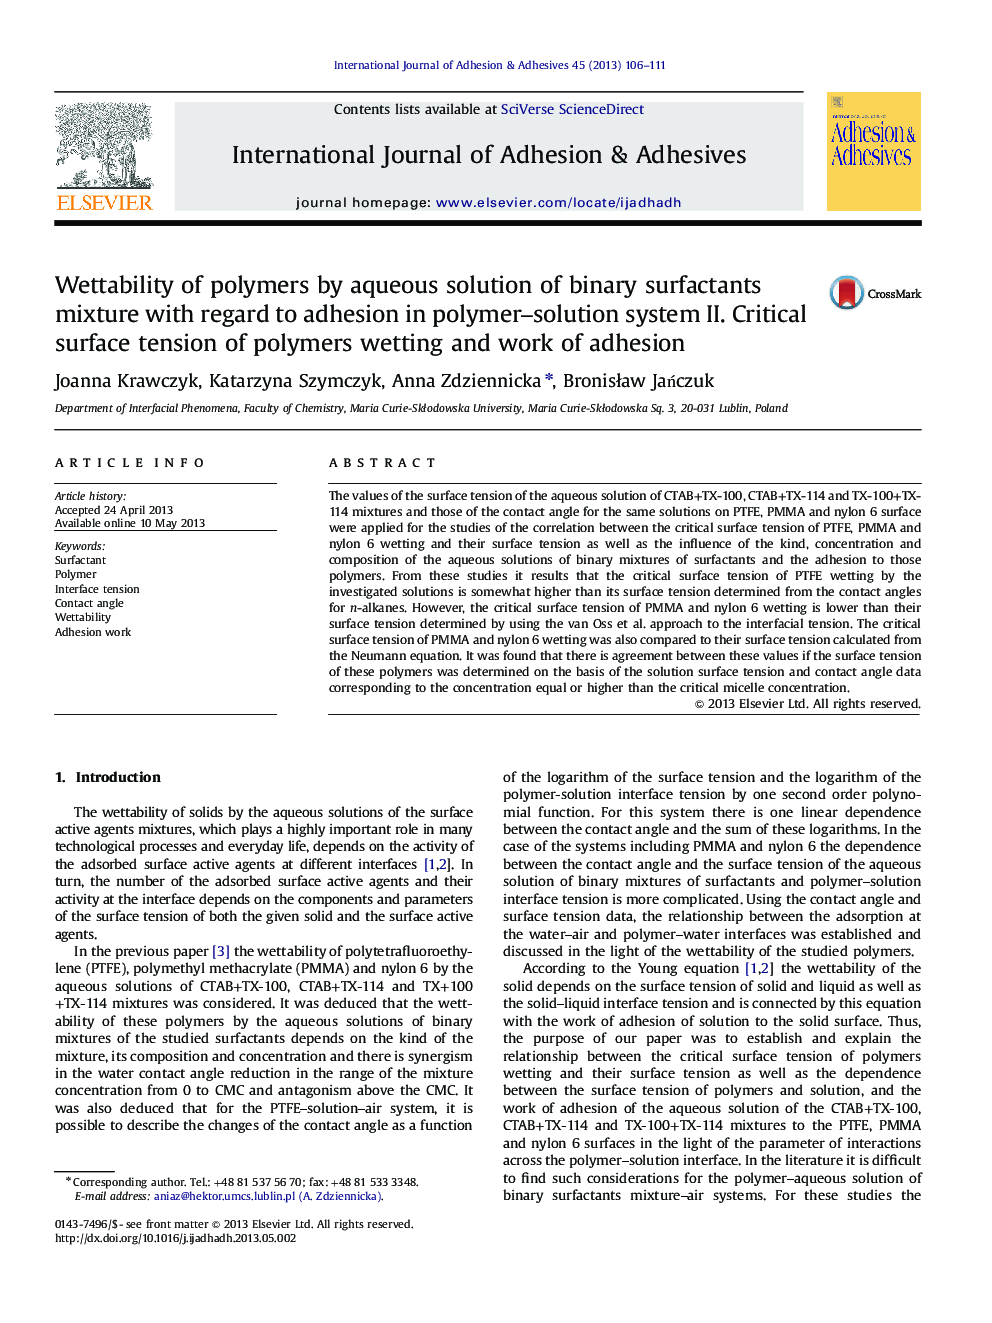 Wettability of polymers by aqueous solution of binary surfactants mixture with regard to adhesion in polymer–solution system II. Critical surface tension of polymers wetting and work of adhesion